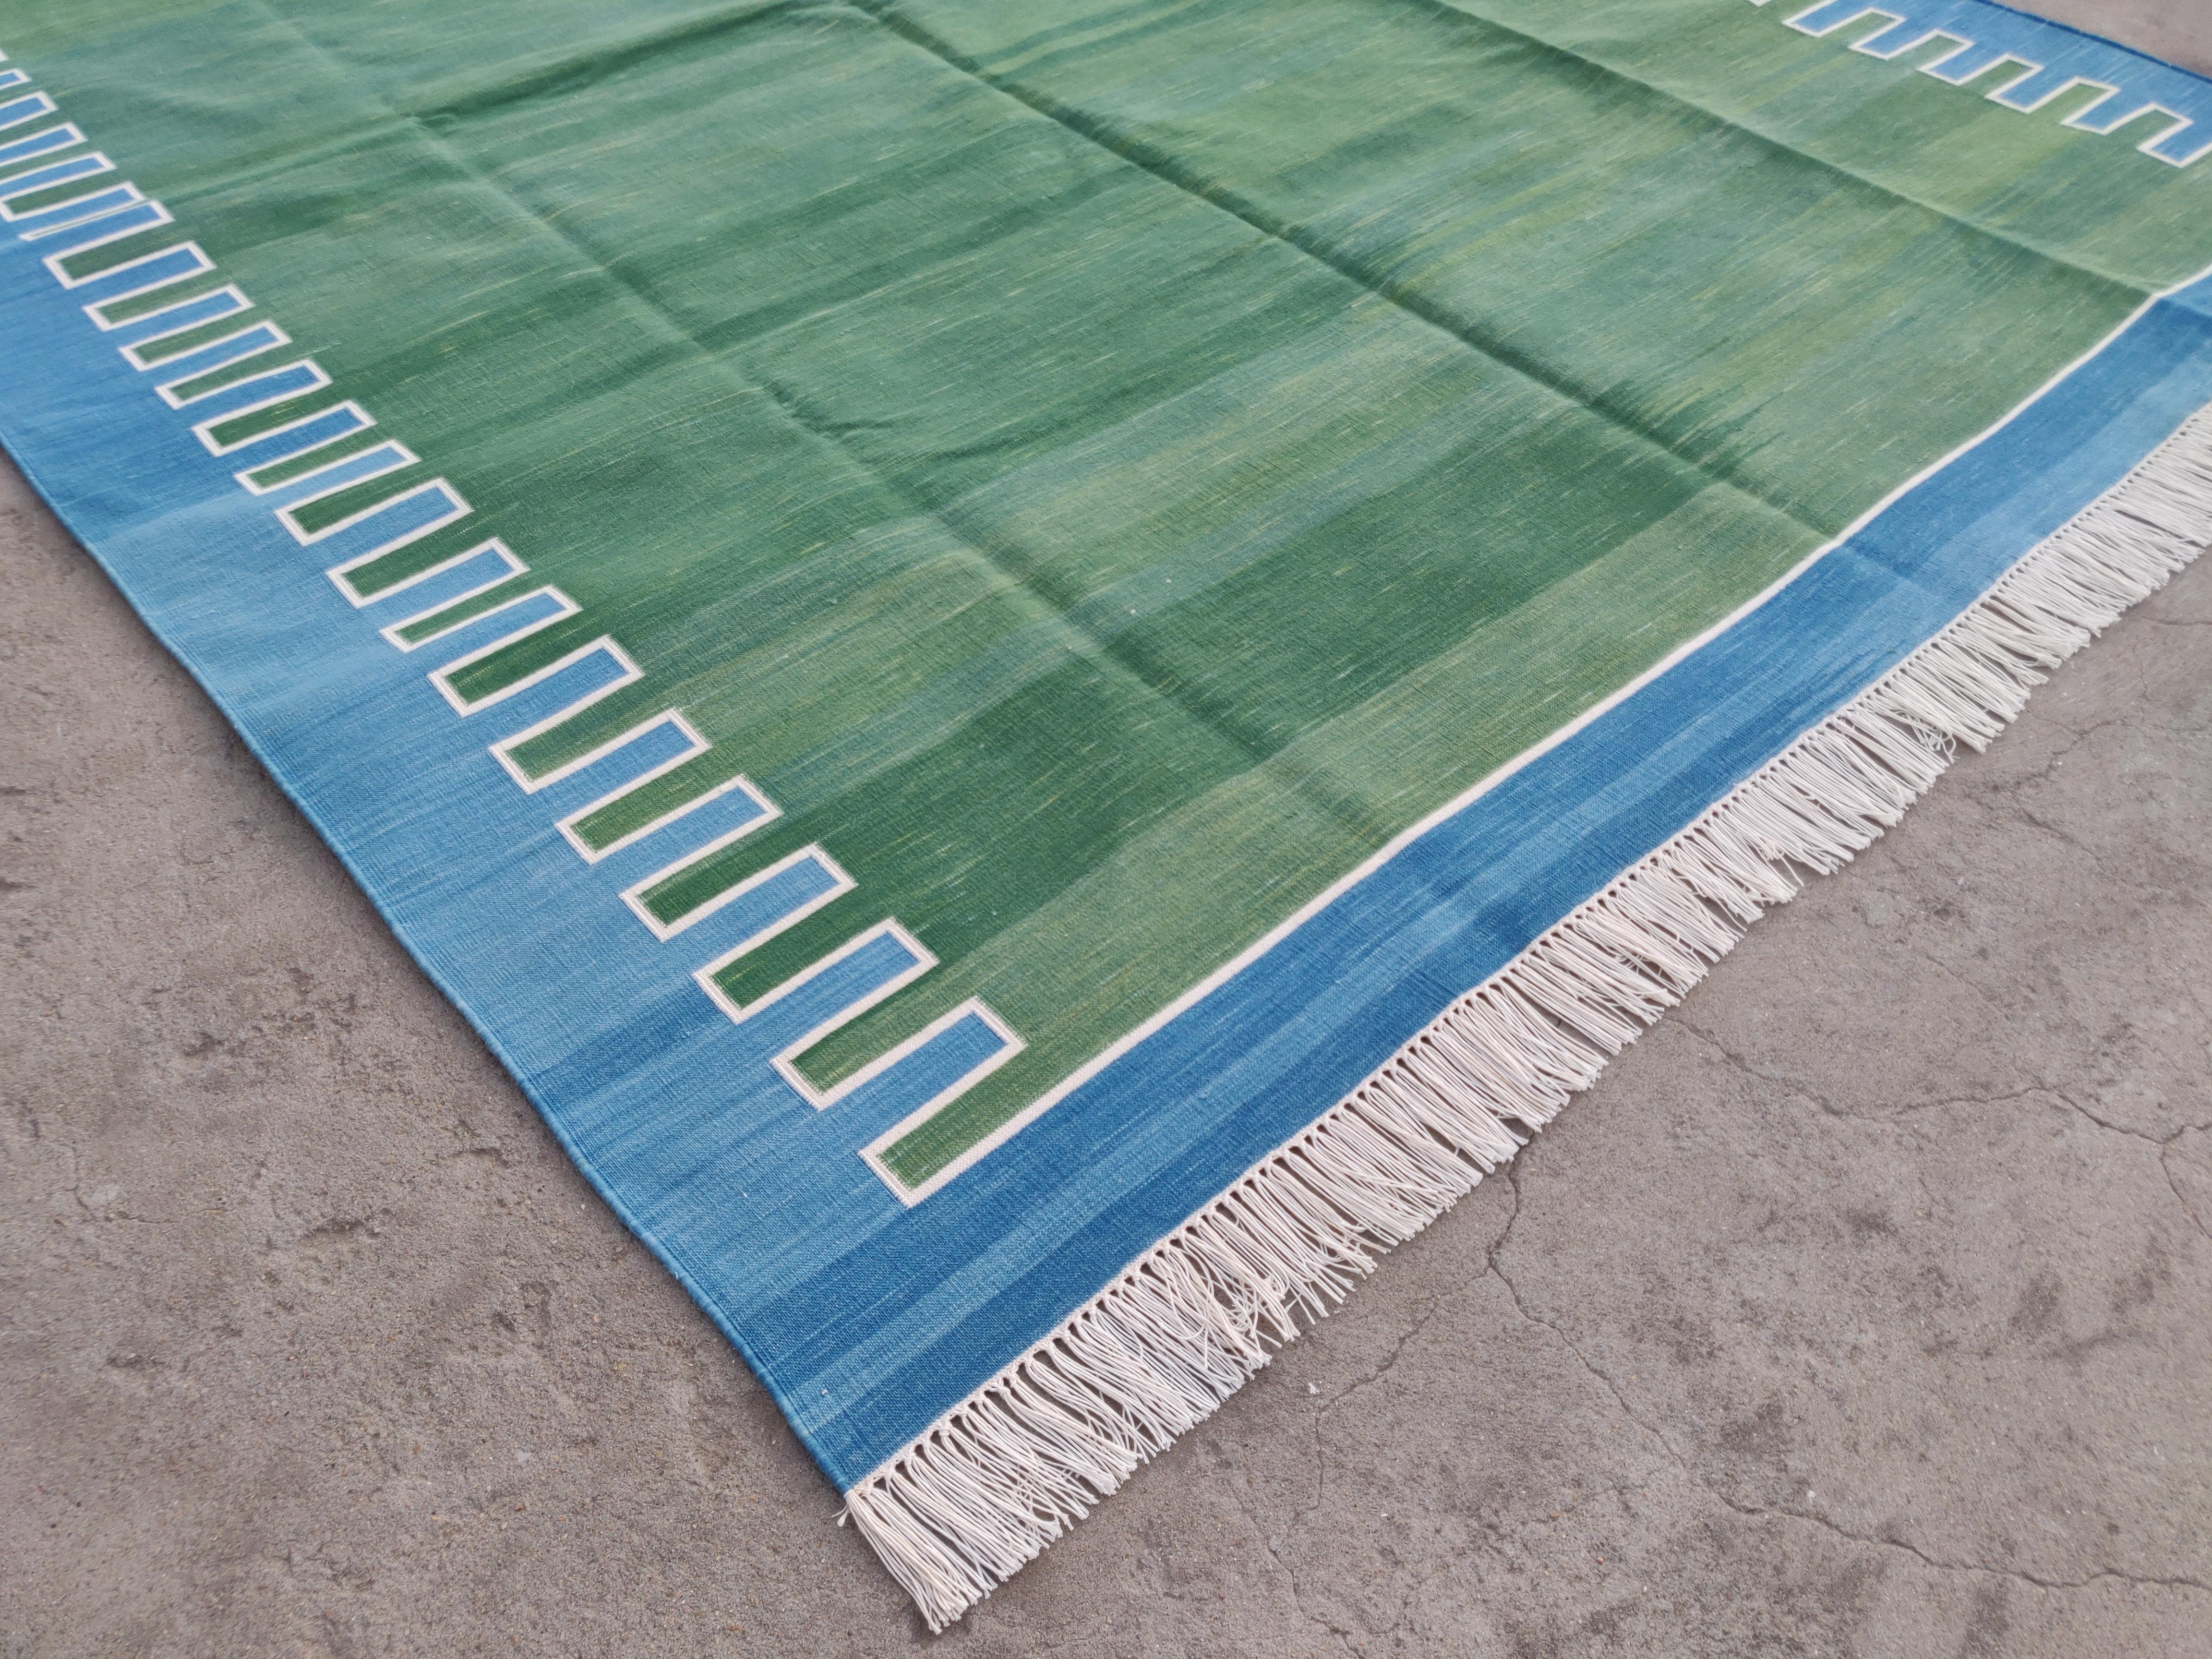 Mid-Century Modern Handmade Cotton Area Flat Weave Rug, 6x9 Green And Blue Striped Indian Dhurrie For Sale